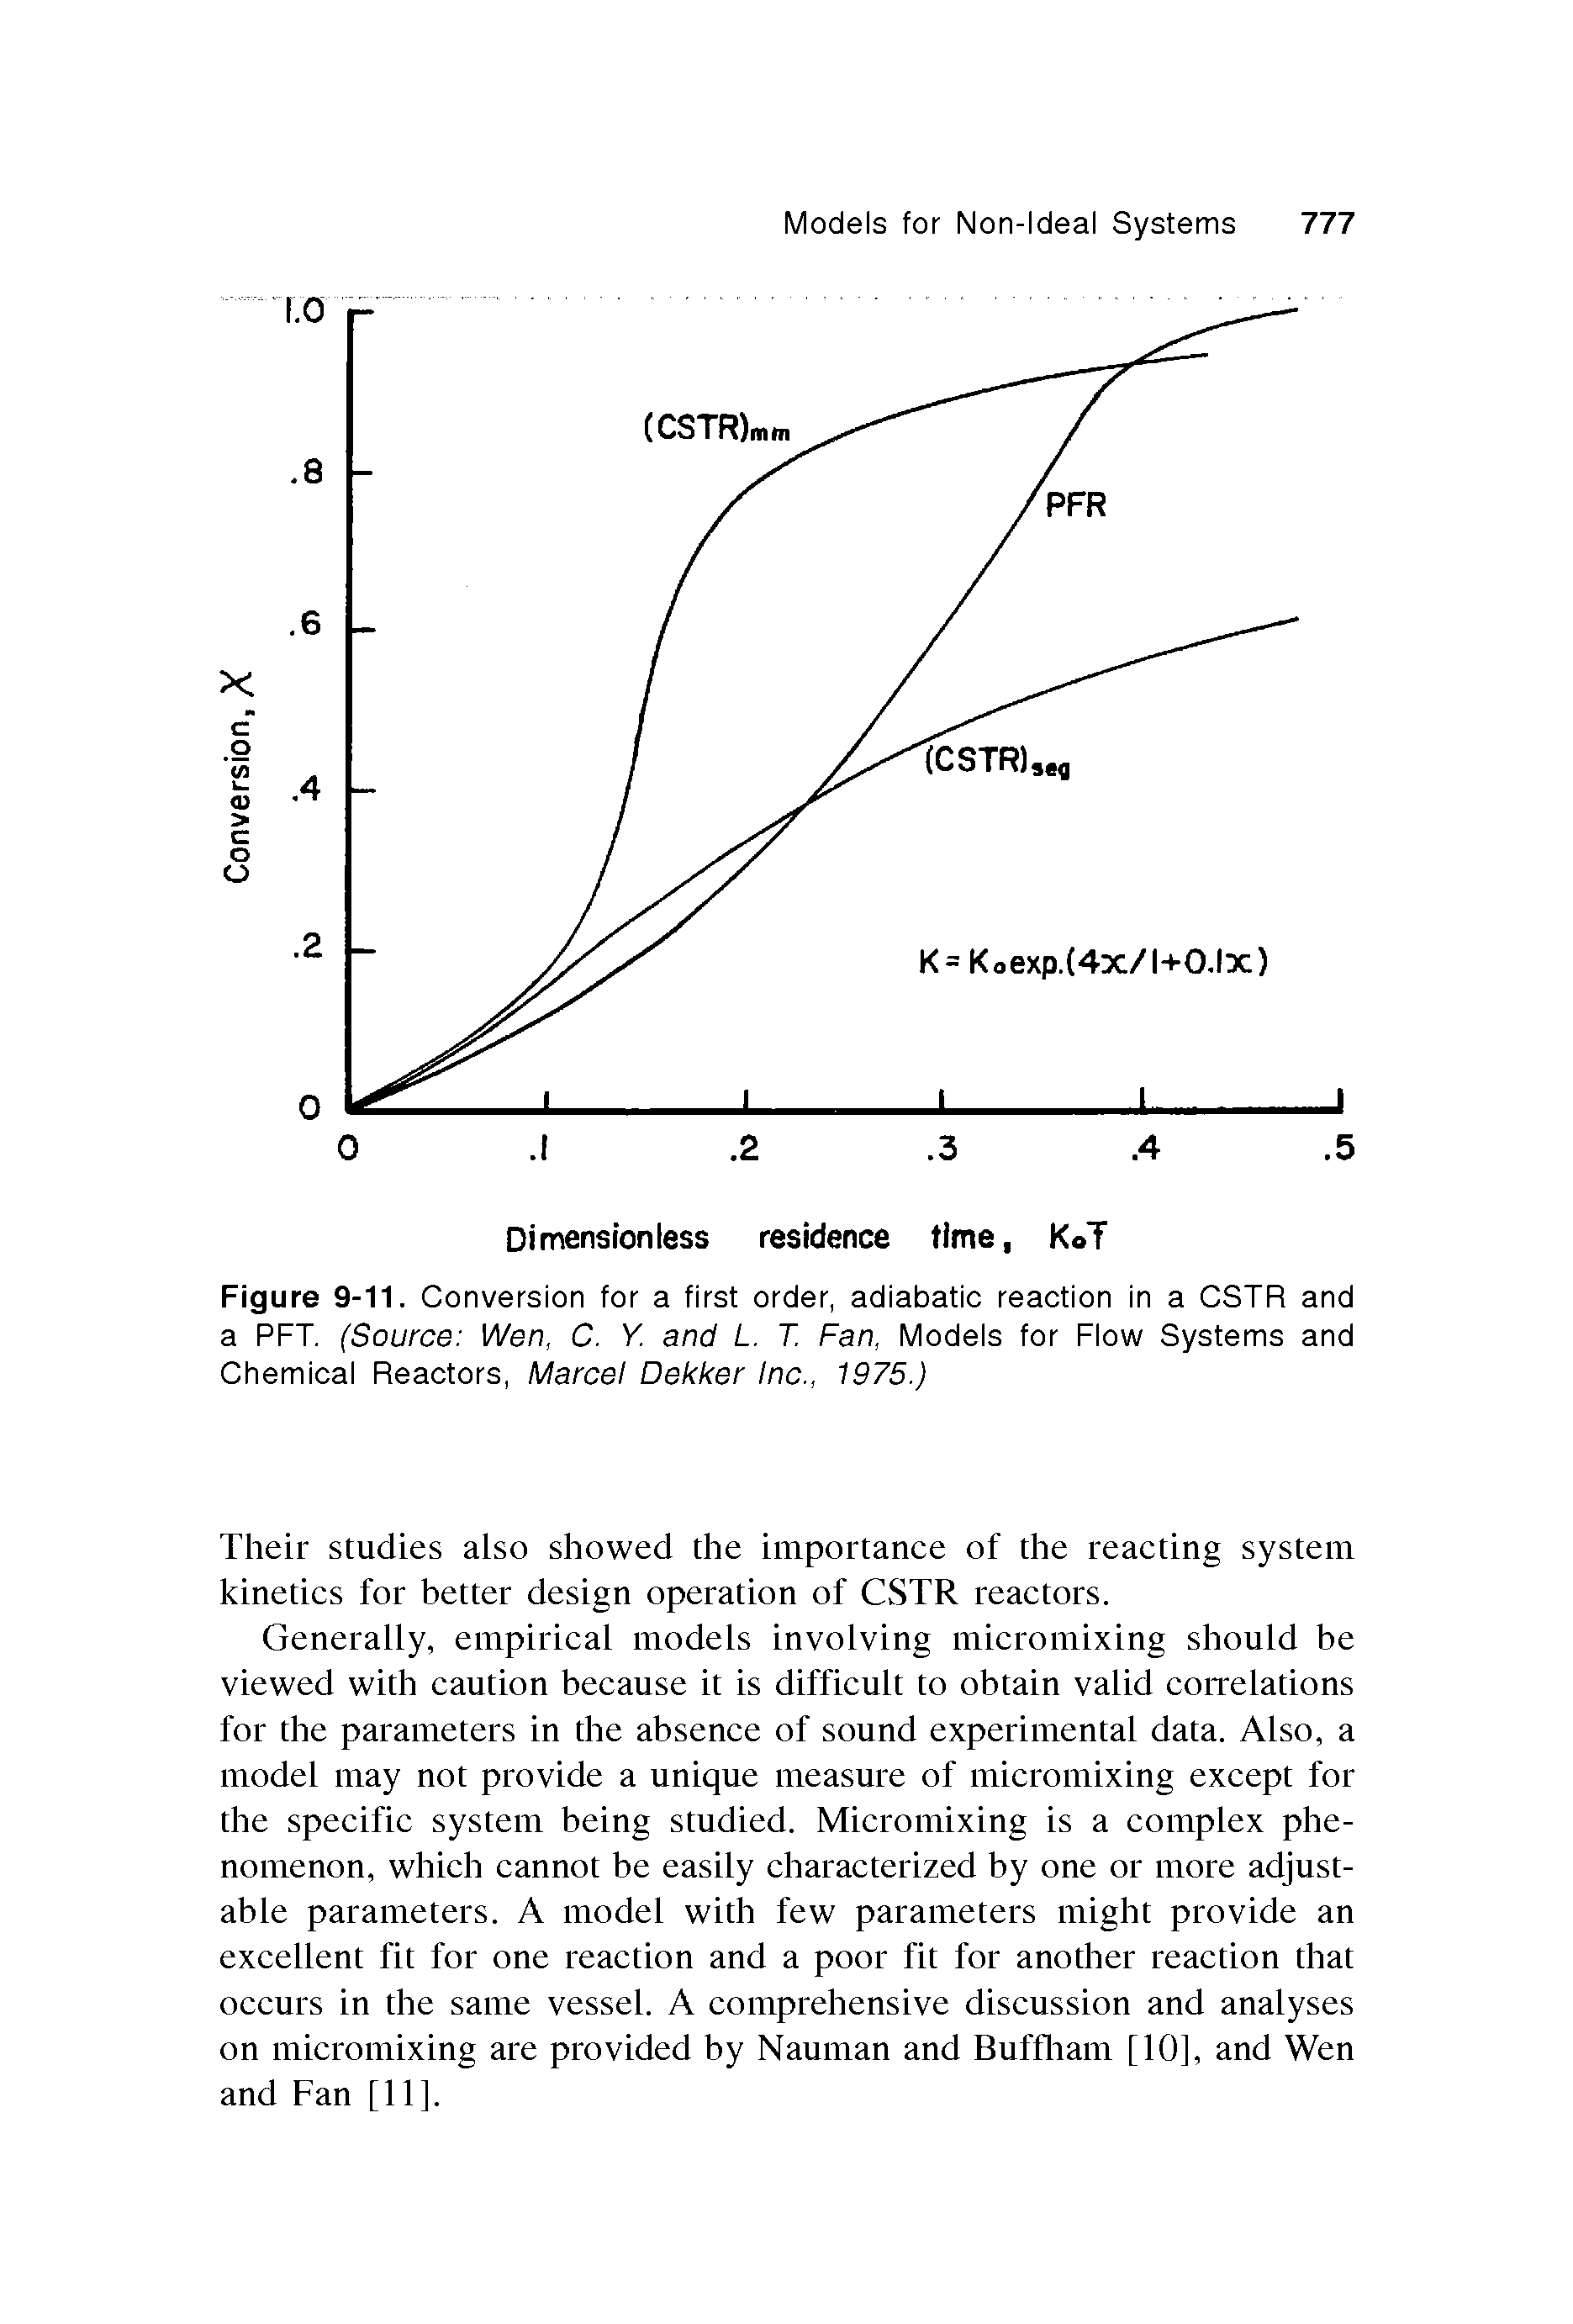 Figure 9-11. Conversion for a first order, adlabatlo reaotlon In a CSTR and a PFT. (Source Wen, C. Y. and L. T. Fan, Models for Flow Systems and Chemloal Reaotors, Marcel Dekker Inc., 1975.)...